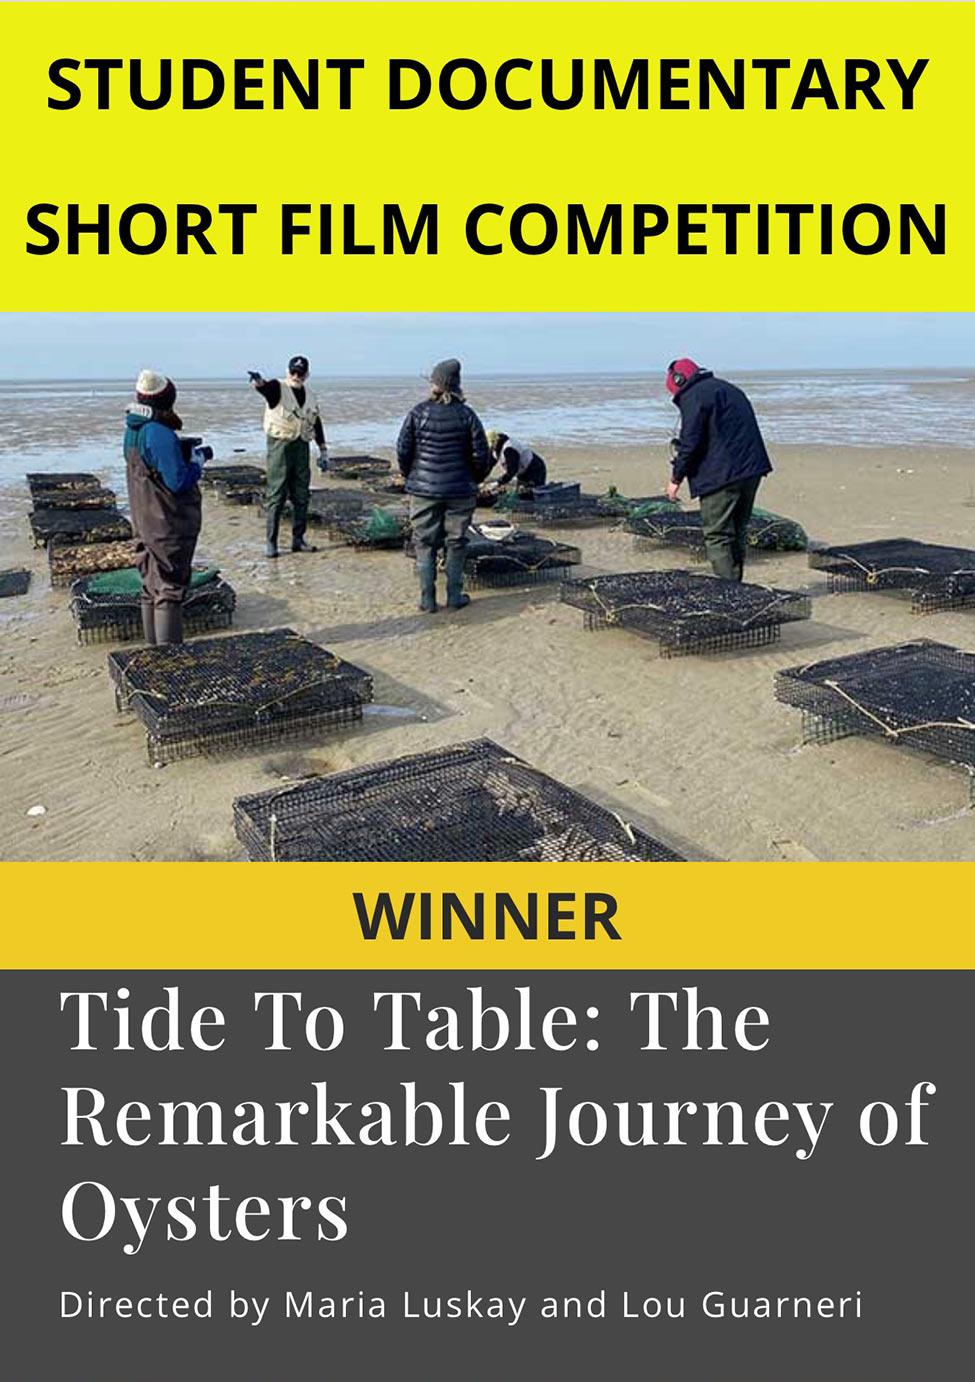 Movie poster with word that read Student Documentary Short Film Competition, Winner, Tide to Table: The Remarkable Journey of Oysters